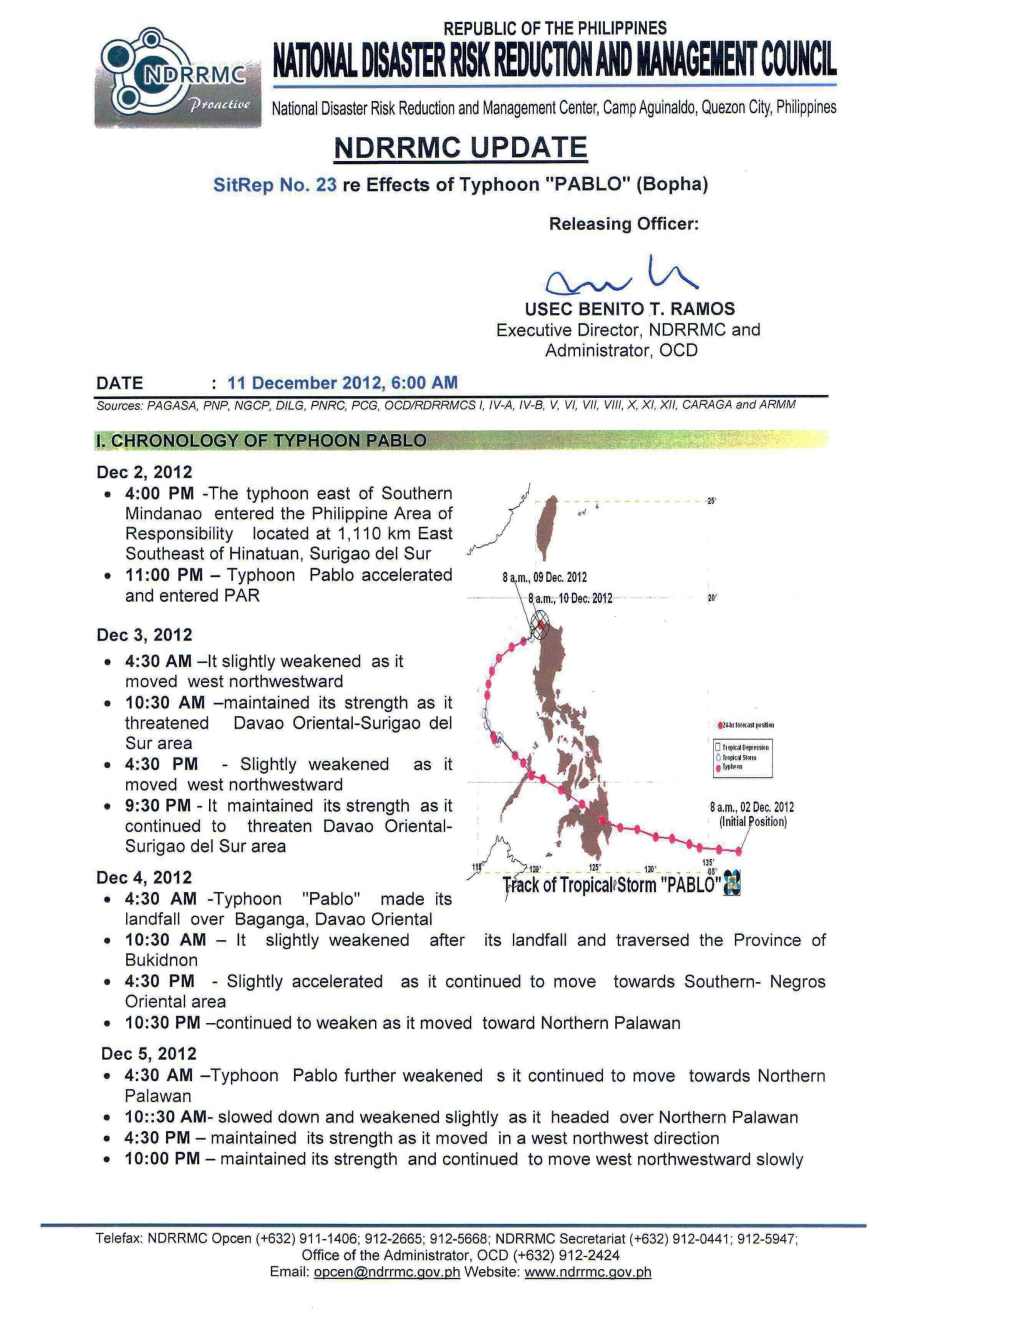 UPD8 Re Sitrep No.23 Effects of Typhoon PABLO As of 11 Dec 2012